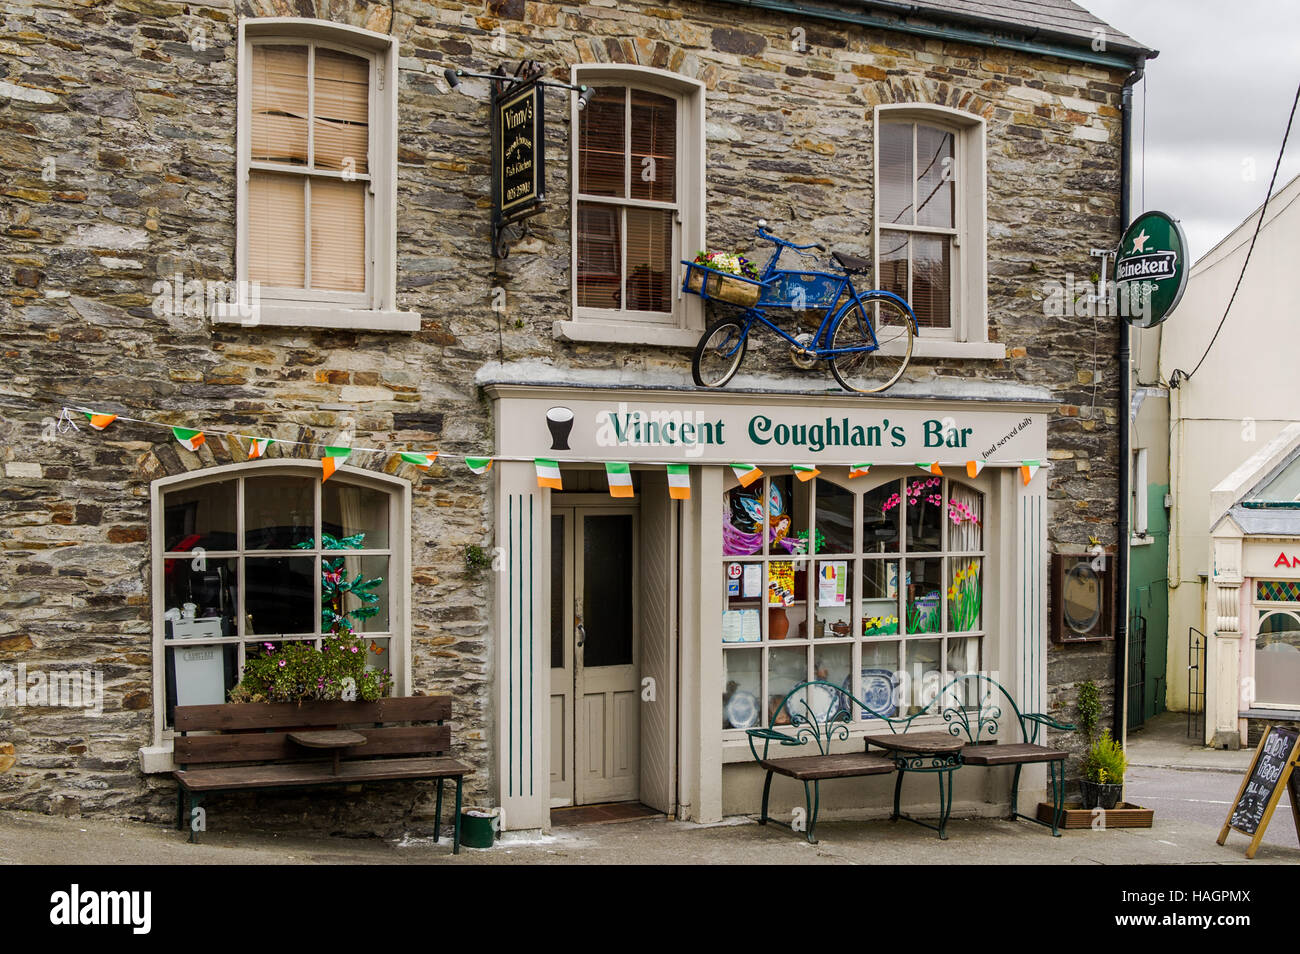 Vincent Coughlans Bar in Ballydehob, West Cork, Irland. Stockfoto